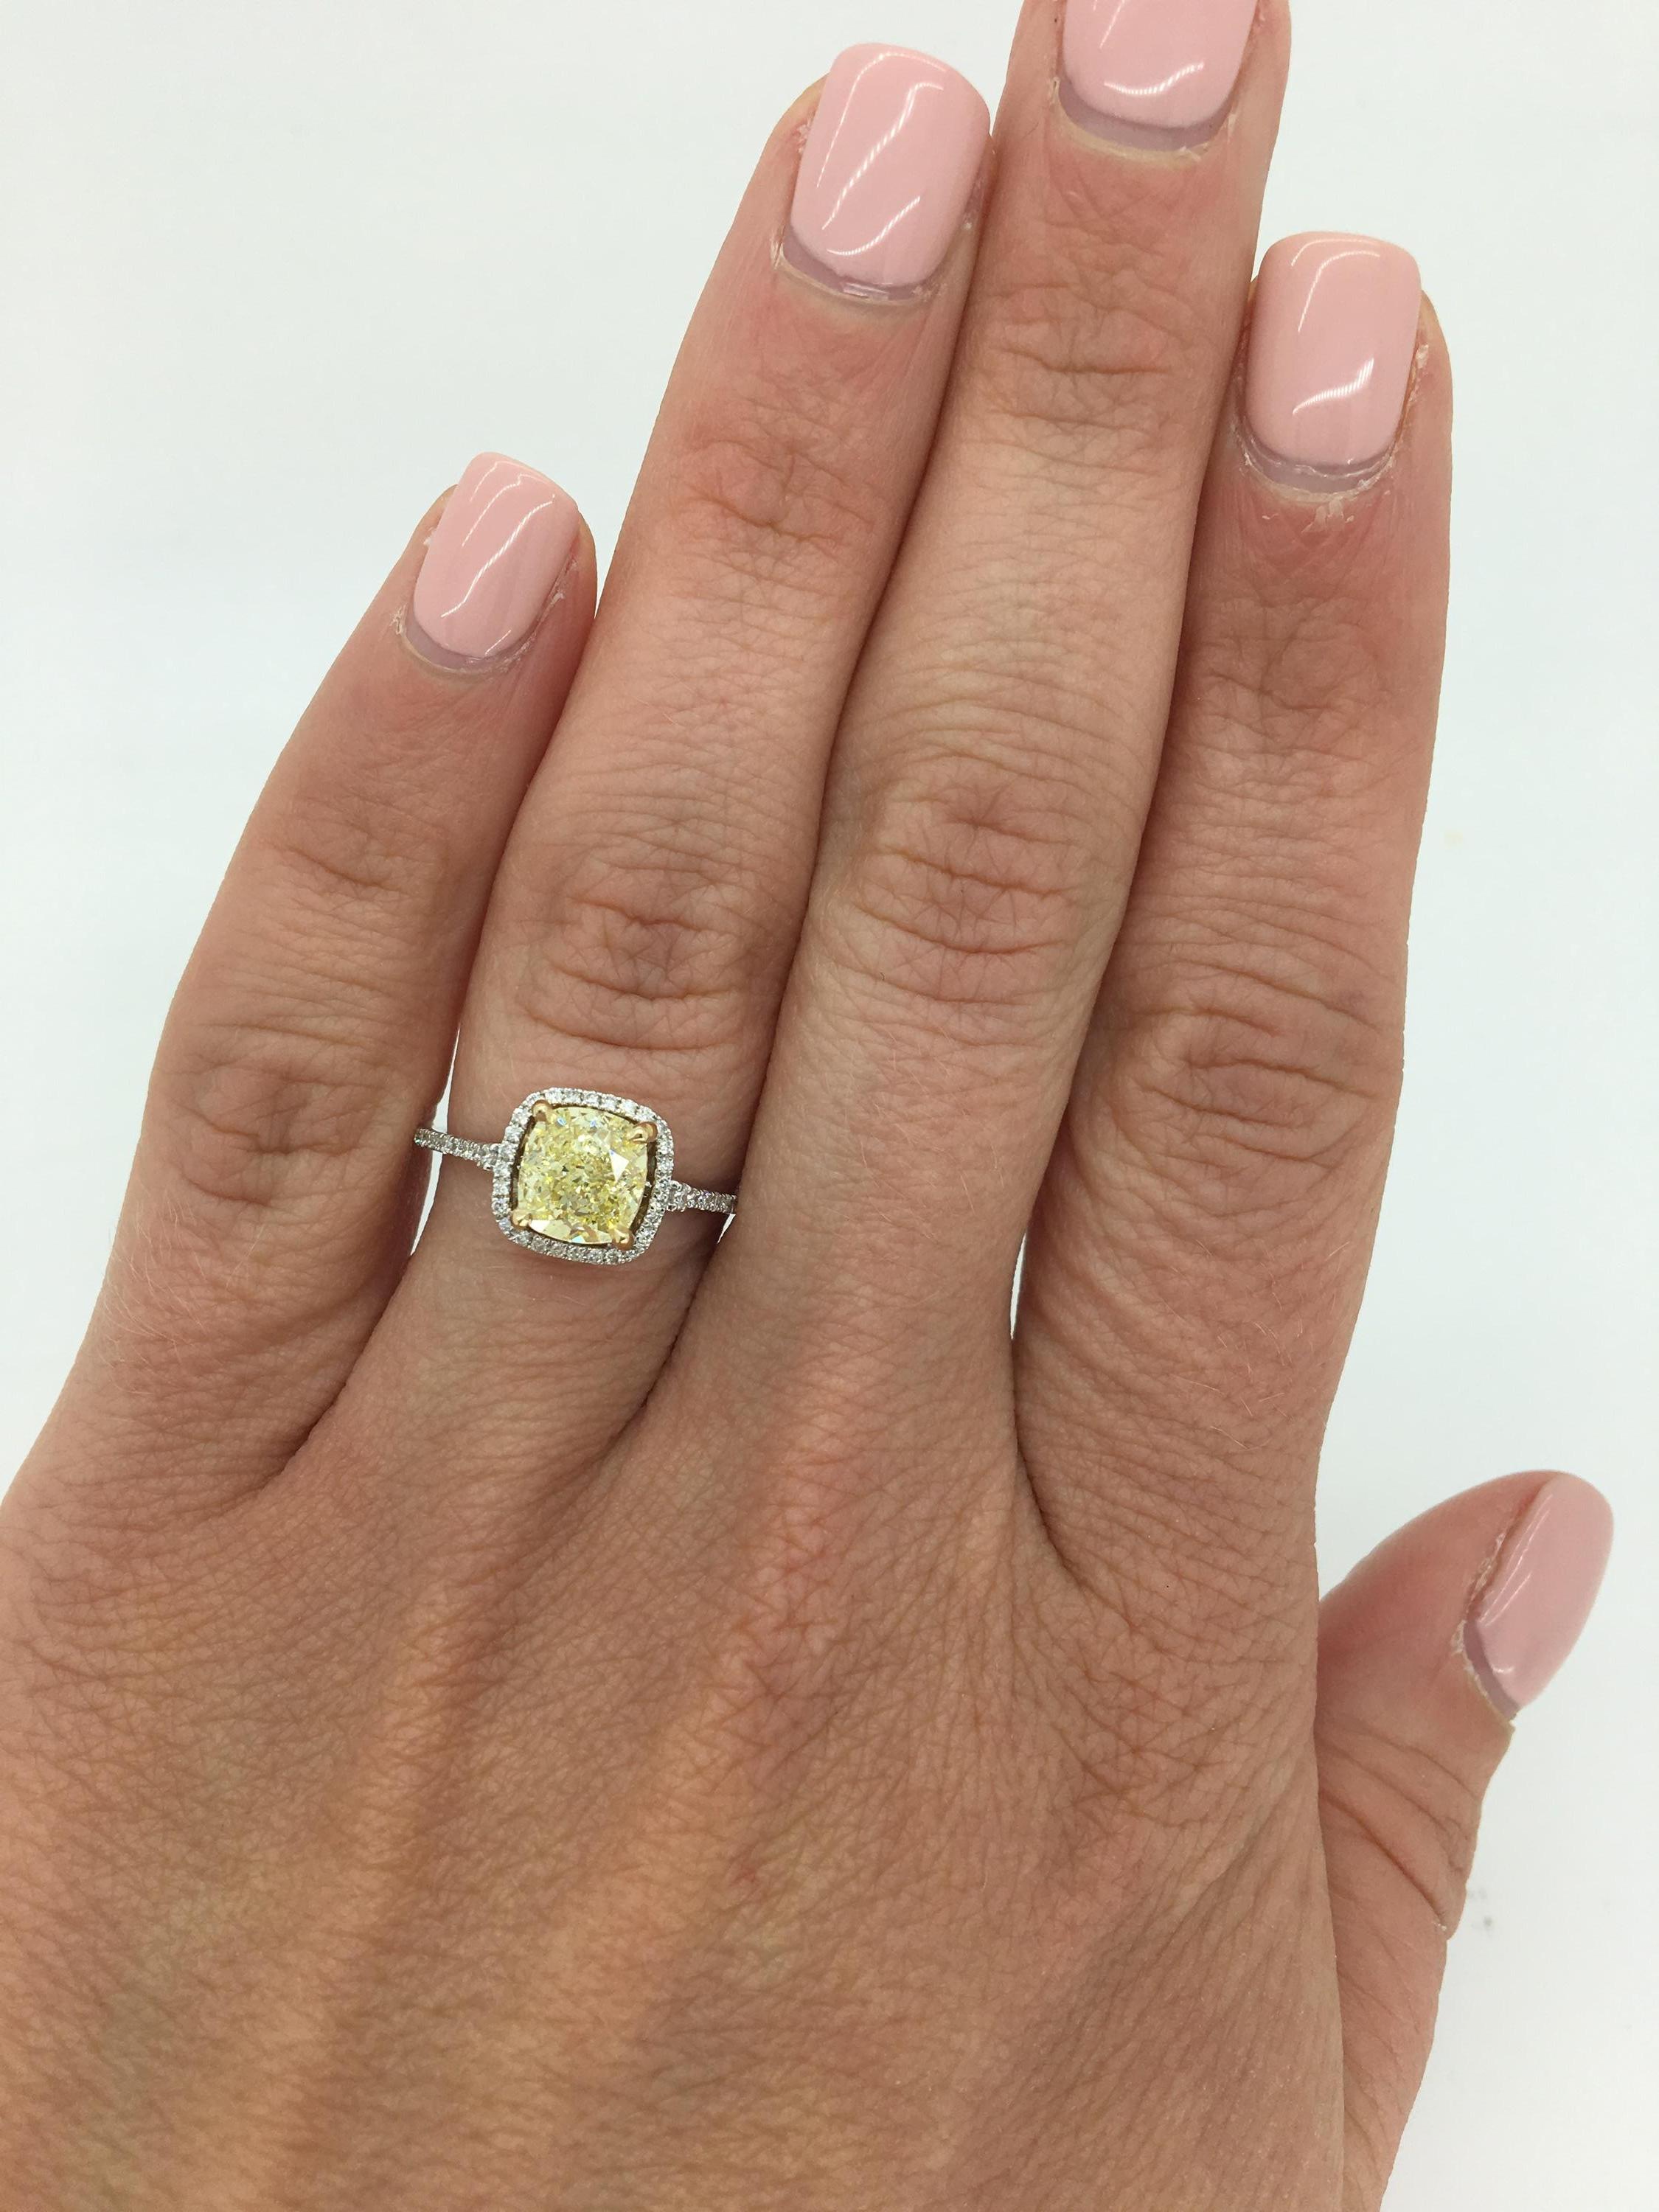 This beautiful ring features a GIA Certified 1.42CT Fancy Light Yellow Diamond with an elegant halo of white round brilliant cut diamonds surrounding it.

 
GIA #2181144601
Center Diamond Carat Weight: 1.42CT
Center Diamond Cut: Cushion Modified